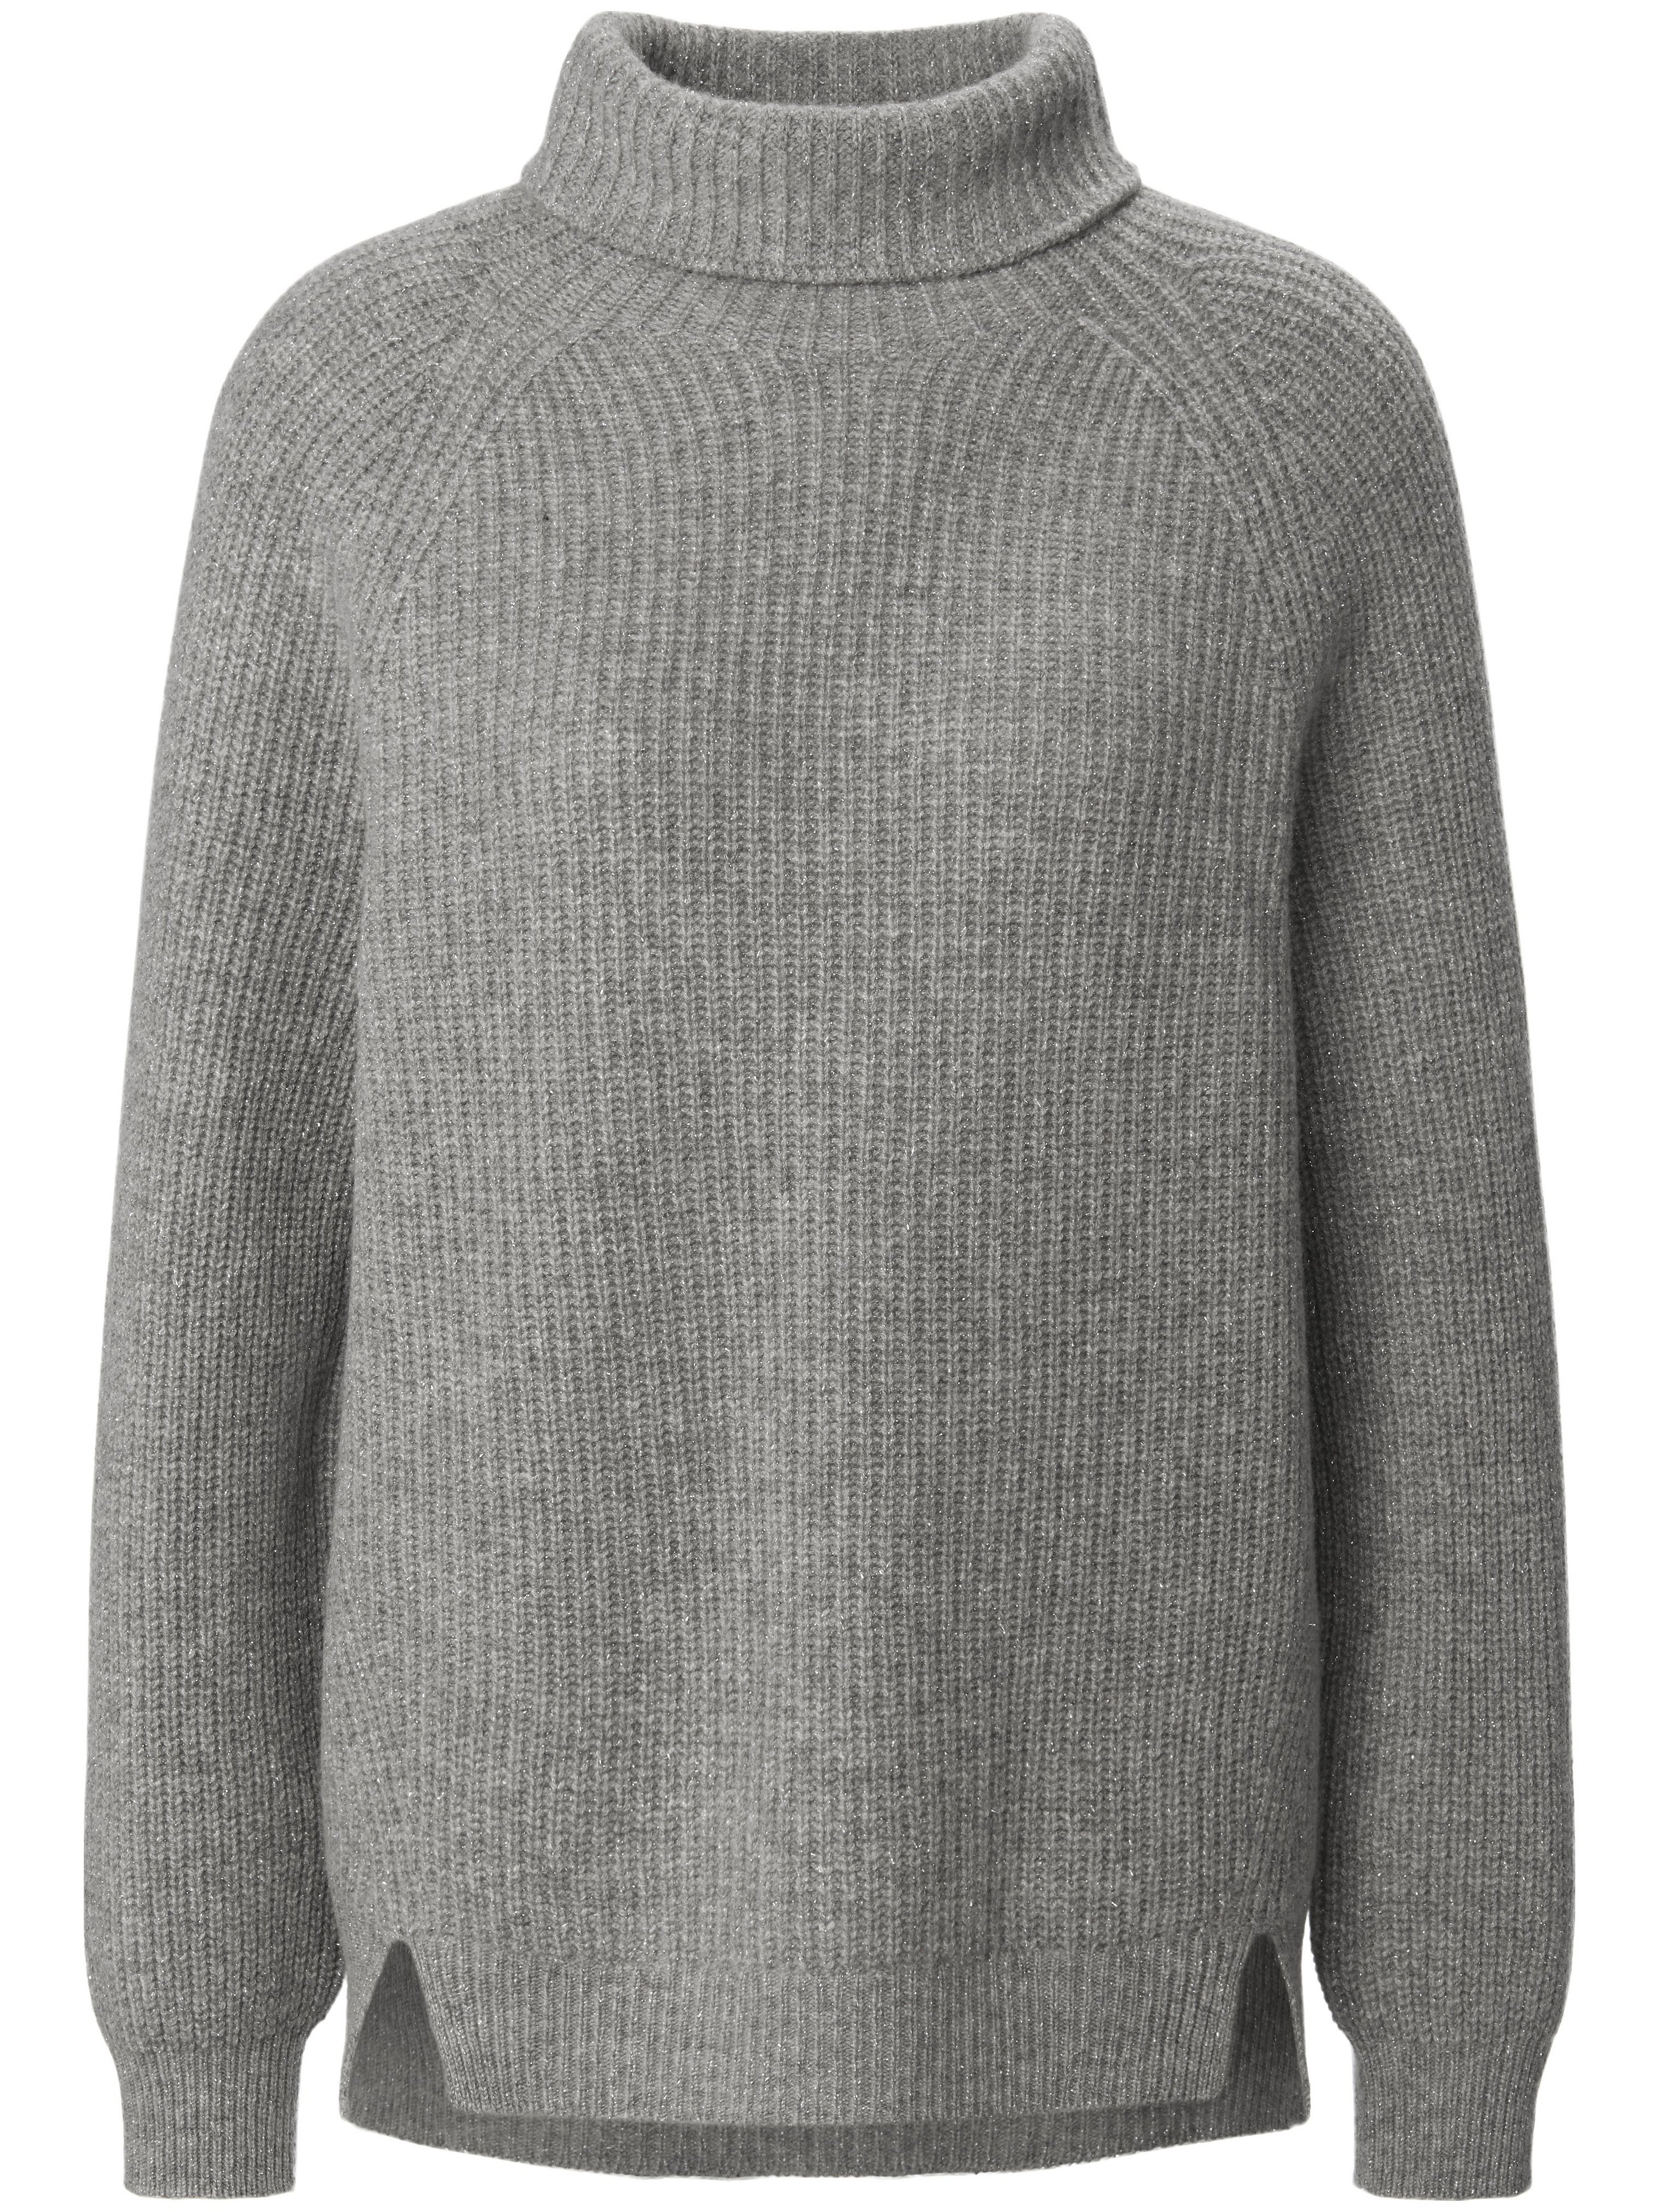 Le pull manches longues raglan  include gris